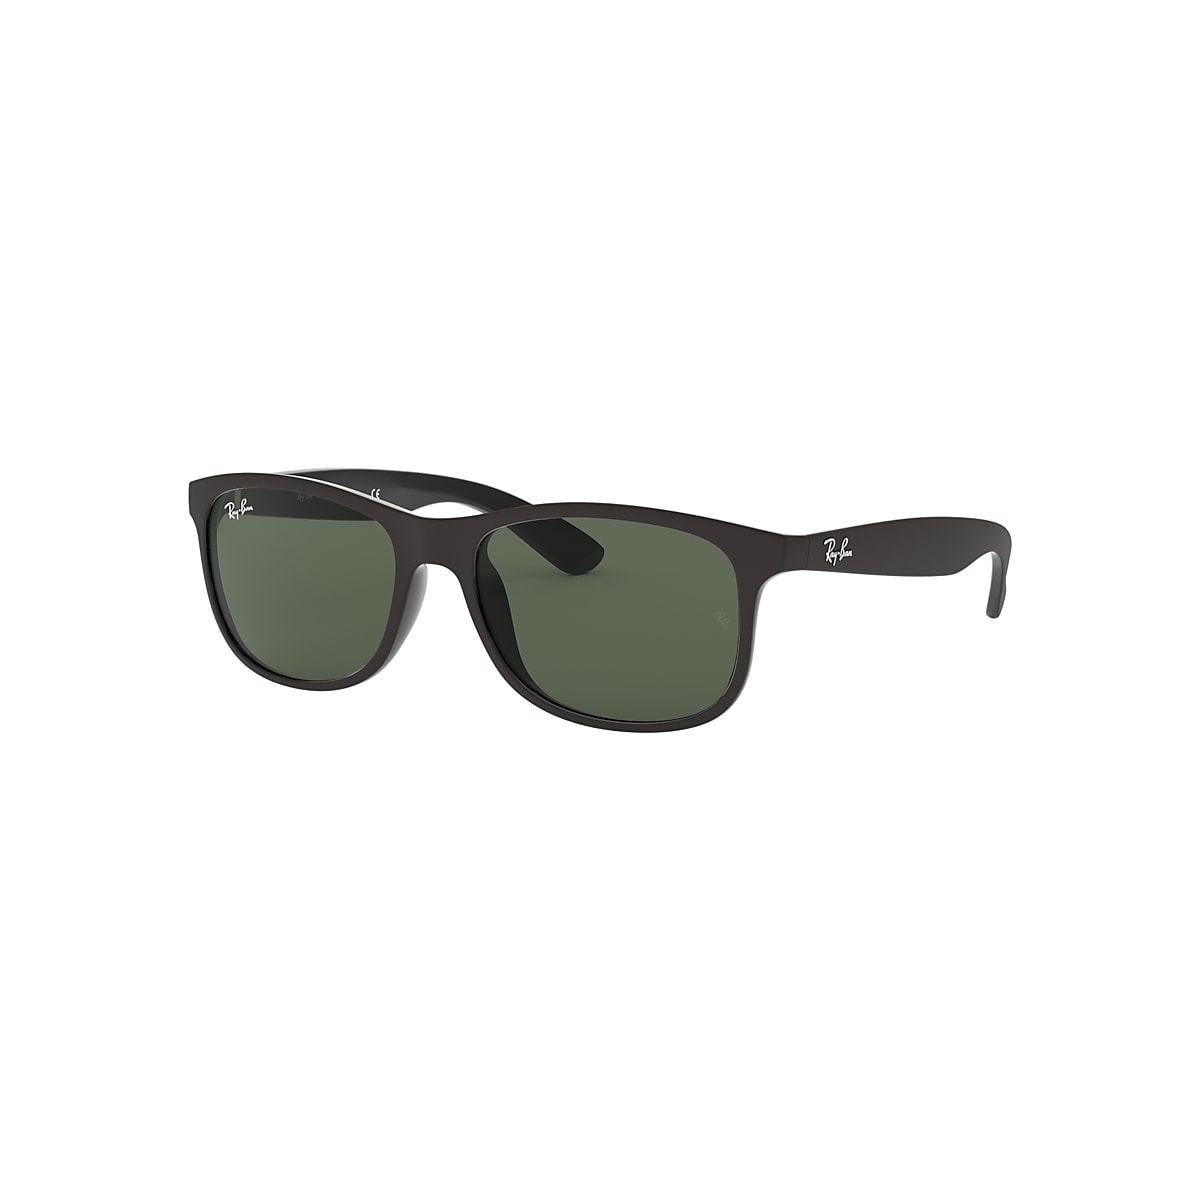 biografi frimærke tykkelse Andy Sunglasses in Black and Green | Ray-Ban®